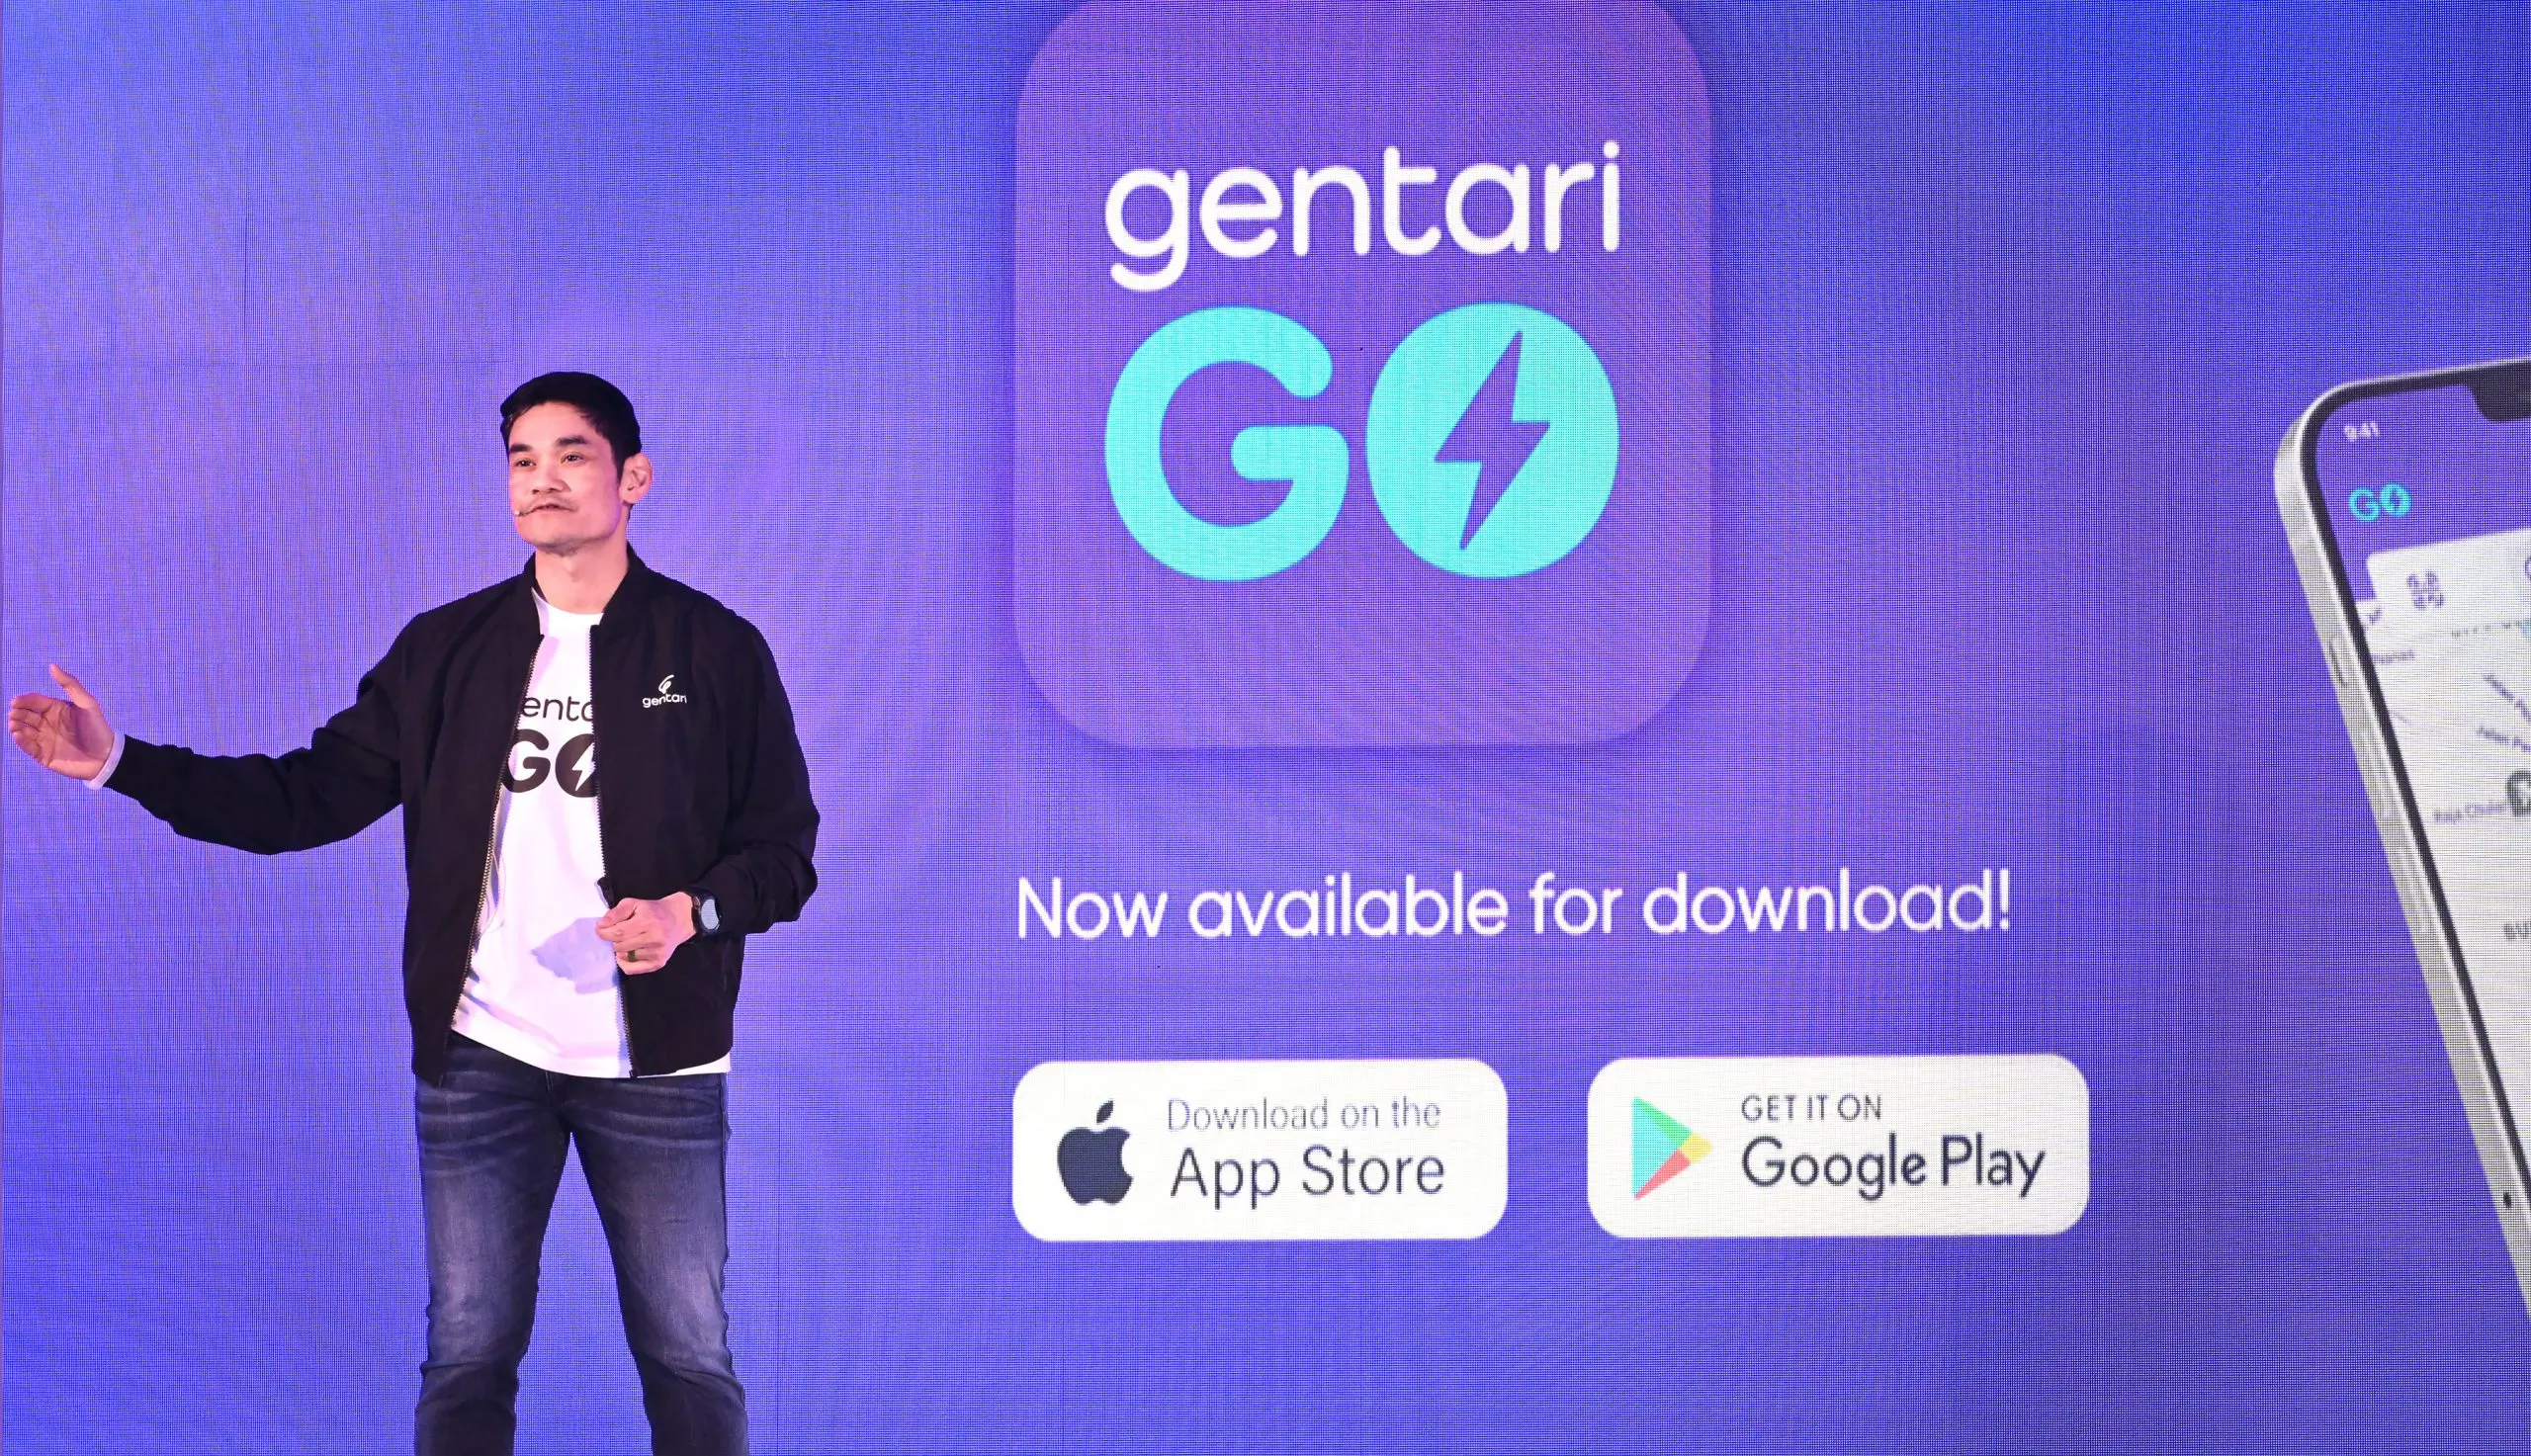 Gentari launches sustainable lifestyle app Gentari Go for consumer access to green mobility and solar solutions